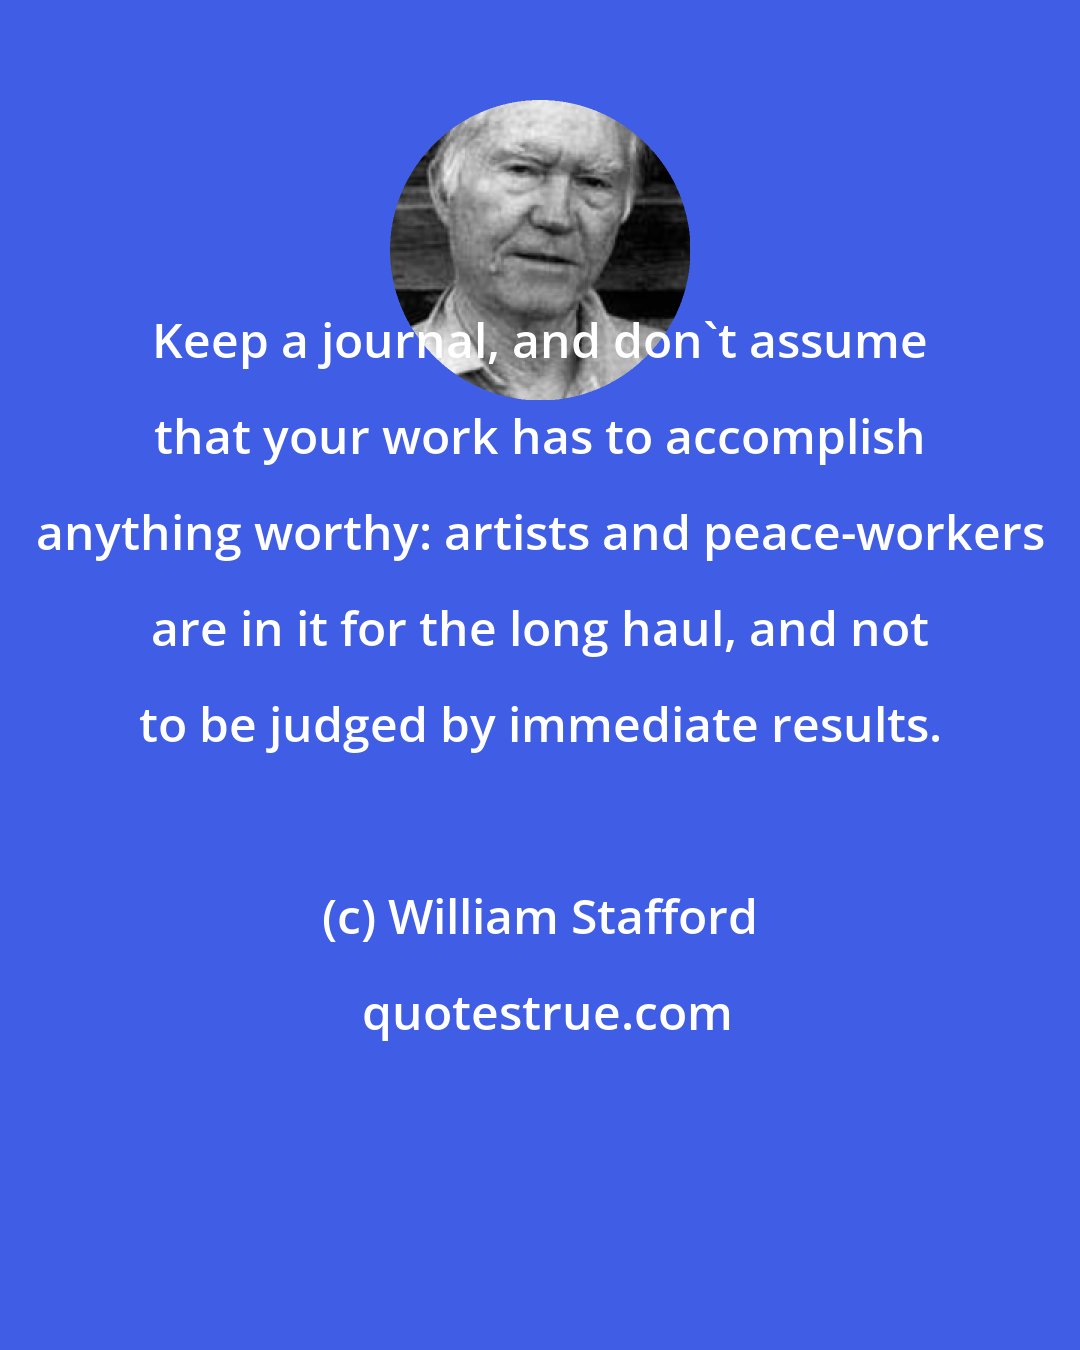 William Stafford: Keep a journal, and don't assume that your work has to accomplish anything worthy: artists and peace-workers are in it for the long haul, and not to be judged by immediate results.